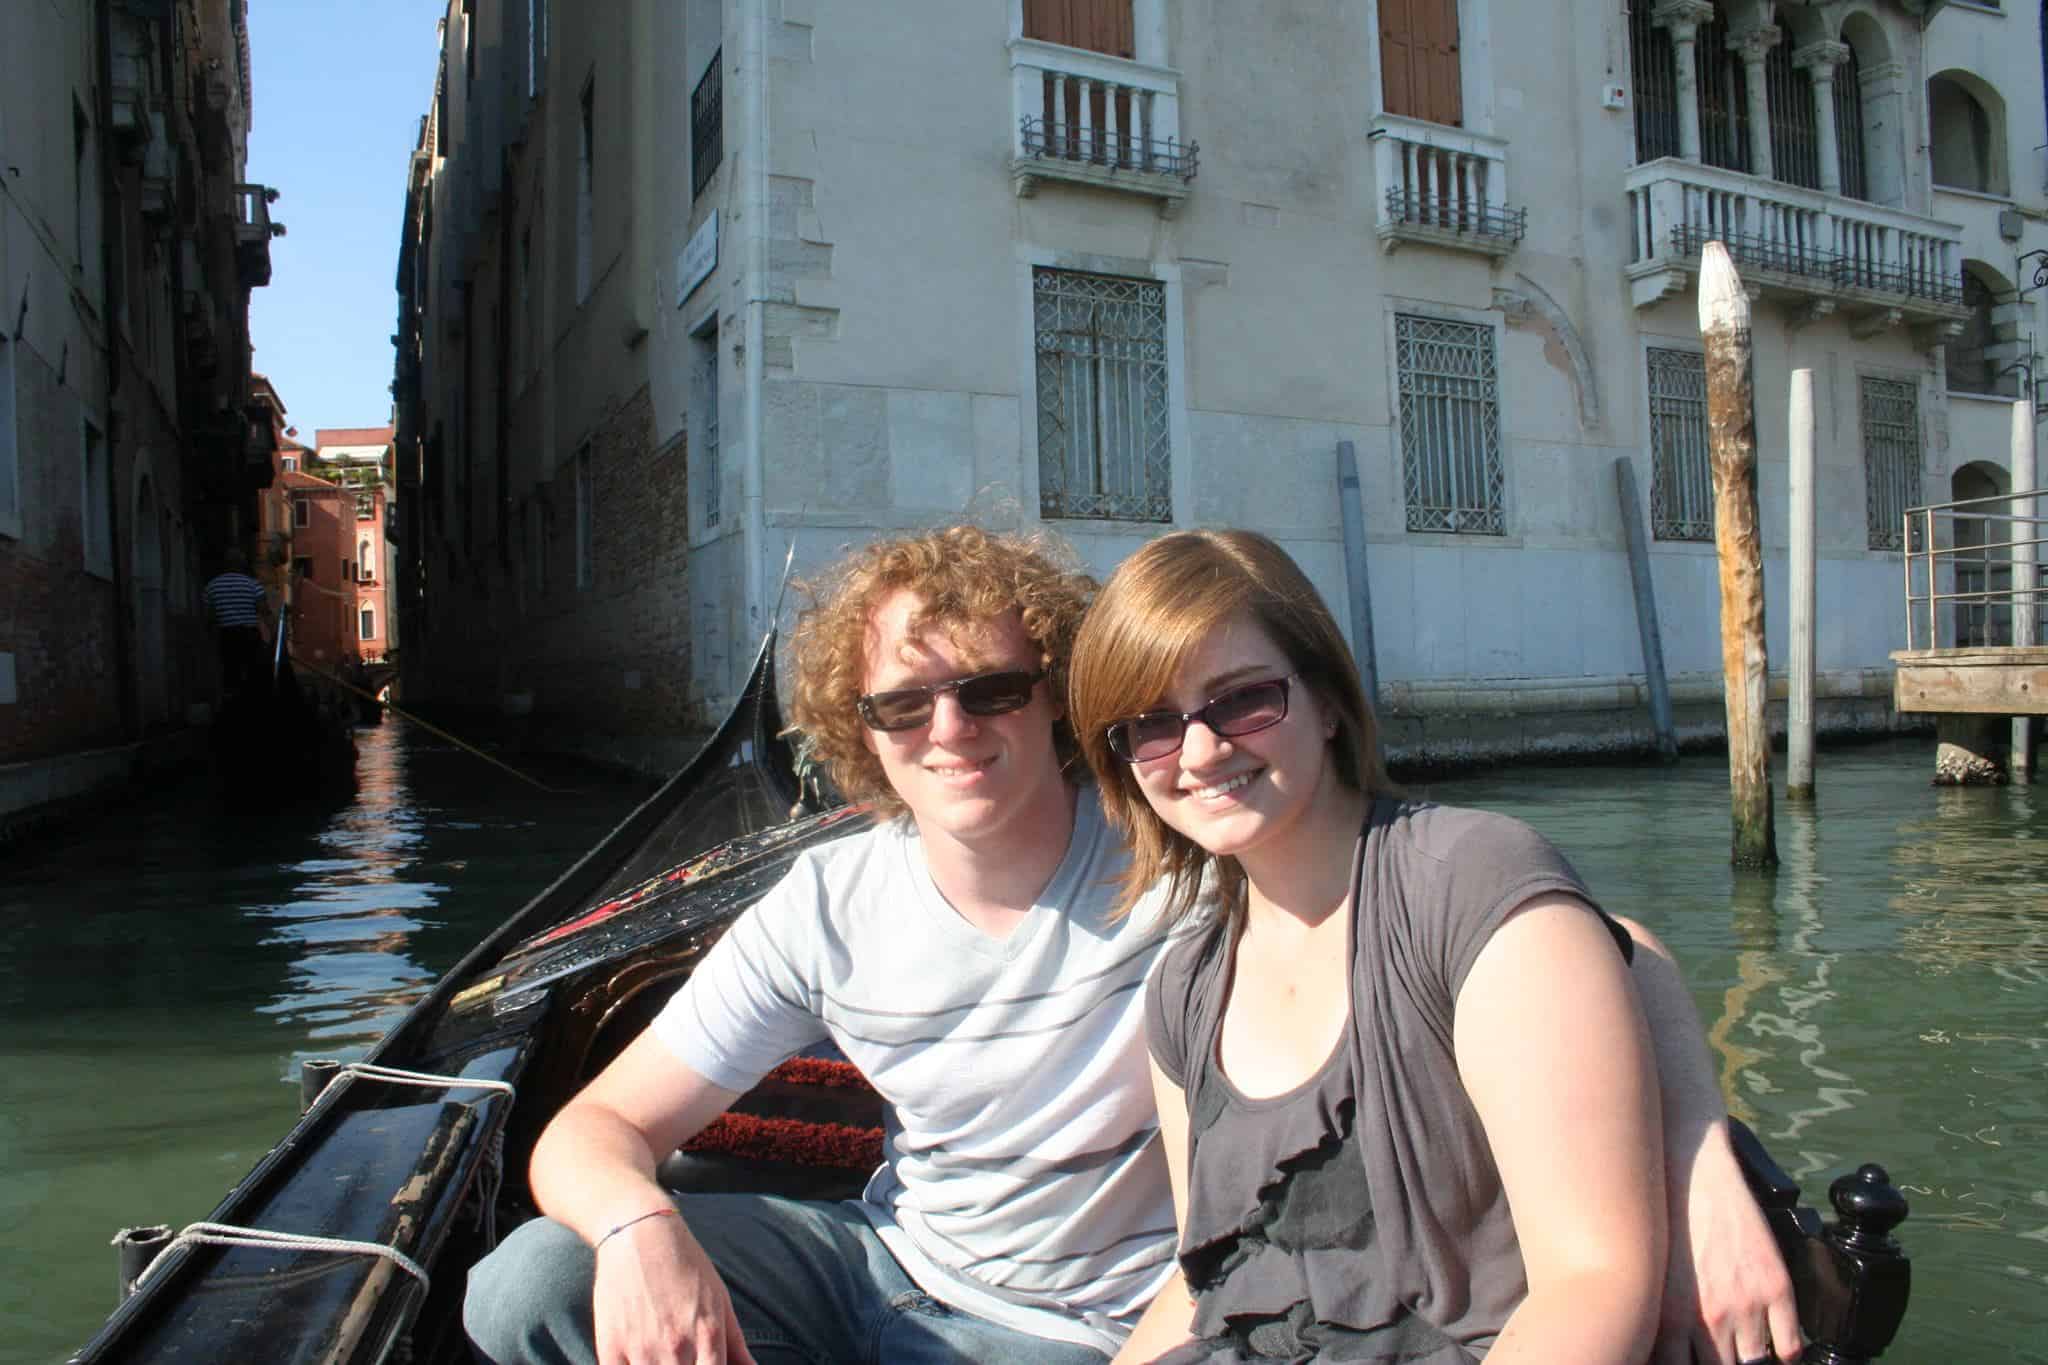 Derek and Kacie riding in a gondola in Venice, Italy